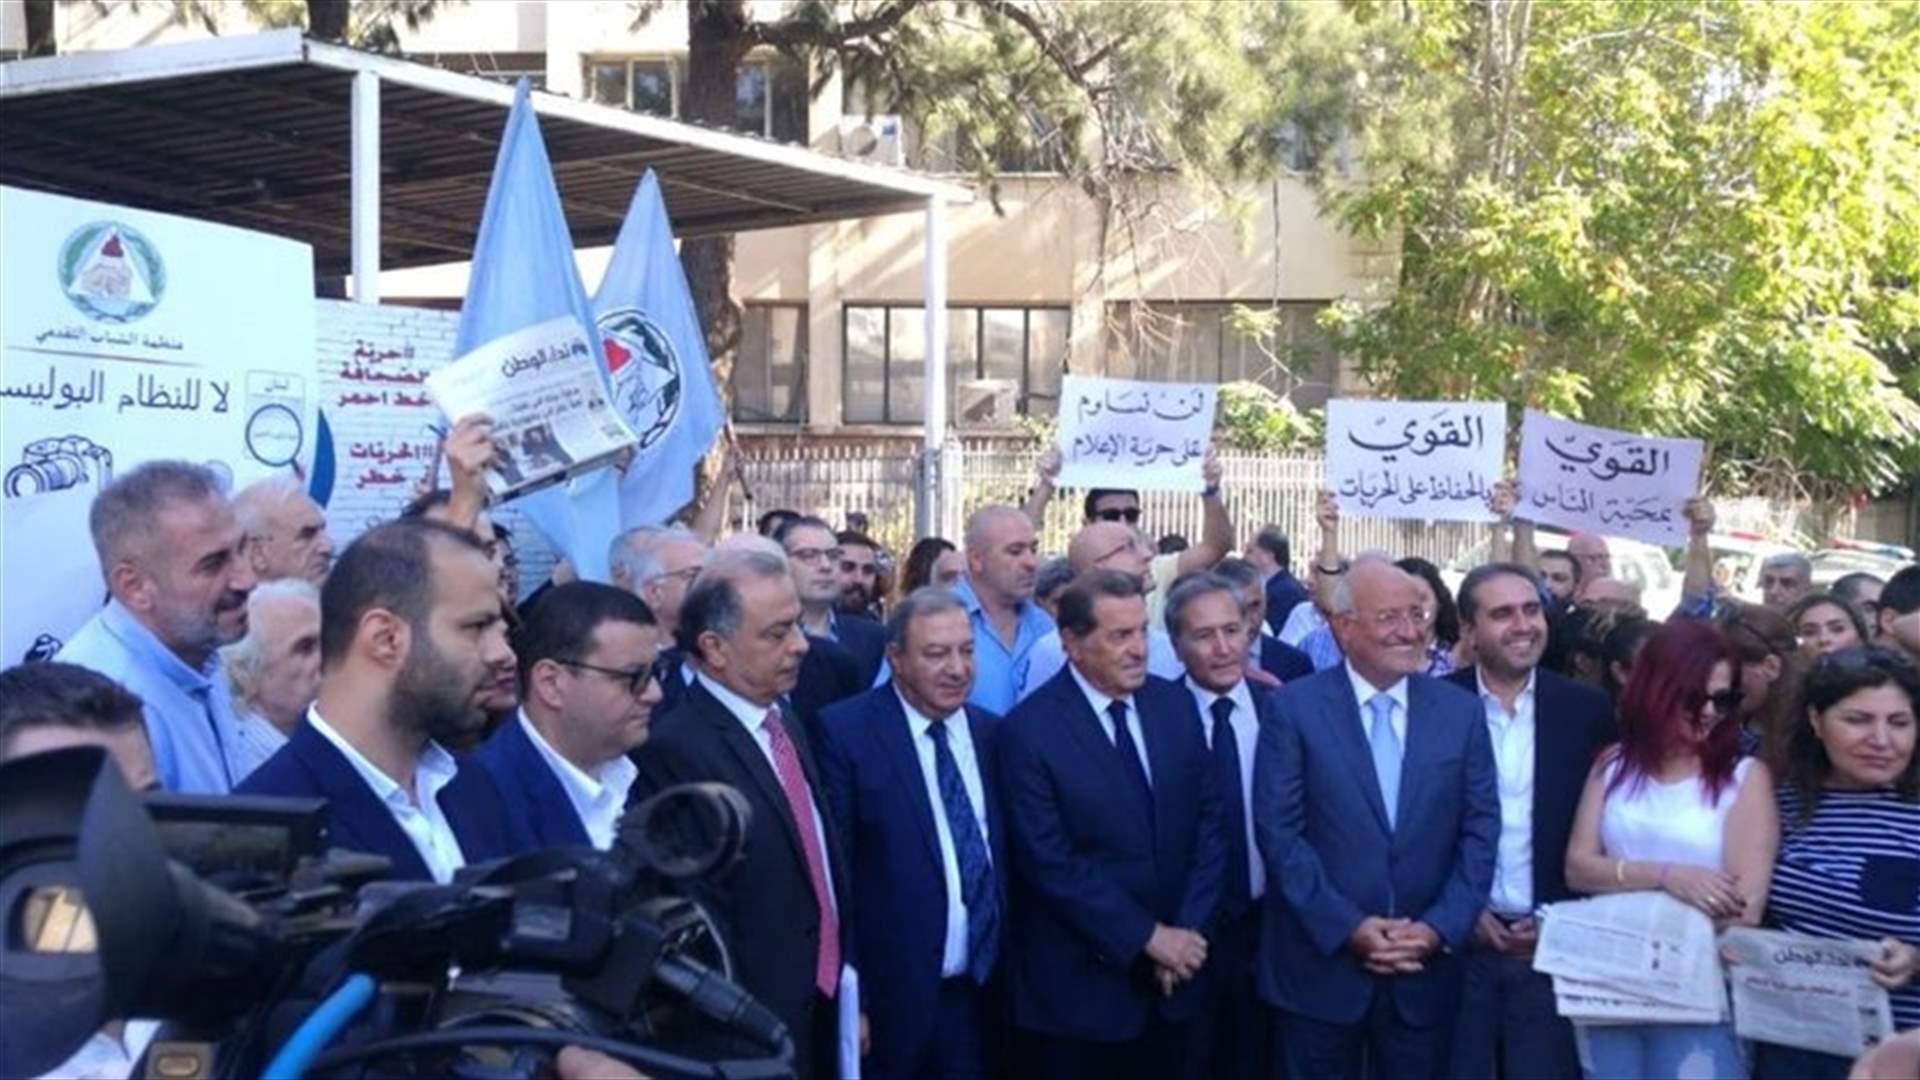 Solidarity stand with Nida al-Watan newspaper staged outside Beirut Justice Palace